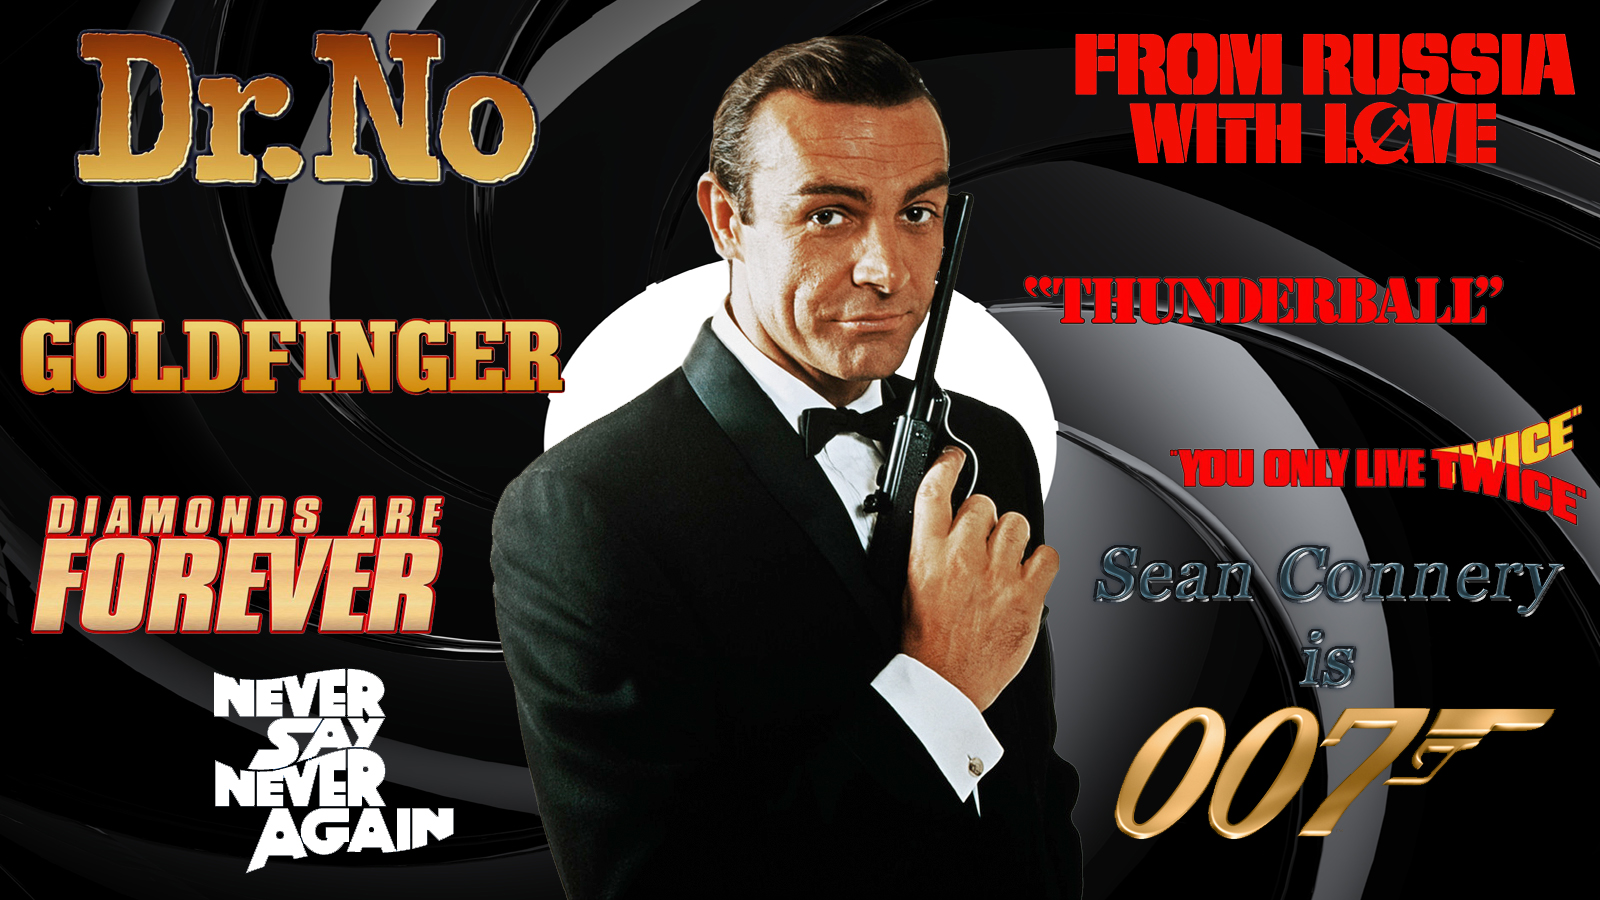 Sean Connery Wallpapers